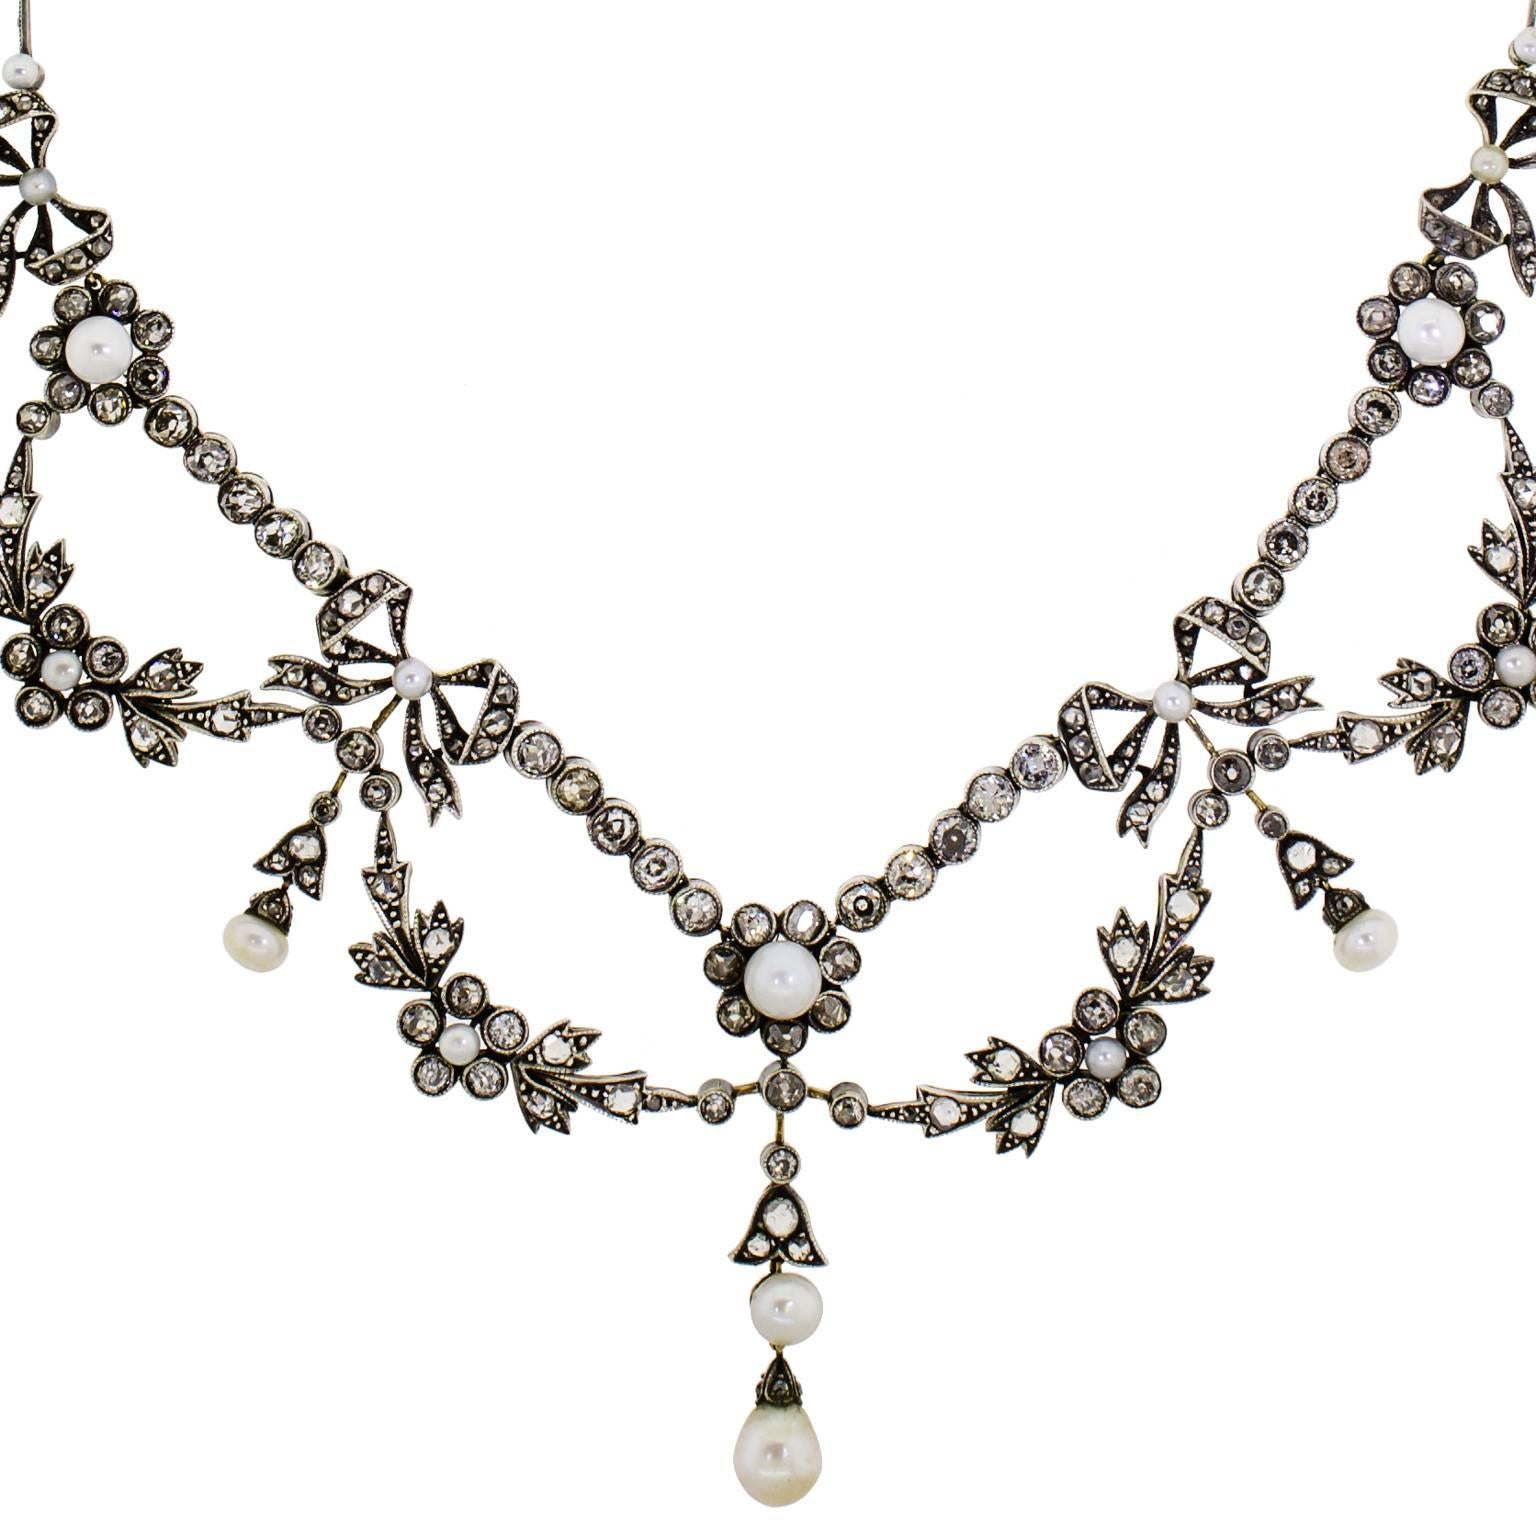 Outstanding Victorian Diamond and Pearl Garland Necklace  set with 56 bezel set old mine cut diamonds weighing approx 7.29 cts further set with 116 rose cut diamonds with an approx. weight of 1.66 cts for a total of 8.95 cts. set into a hand made